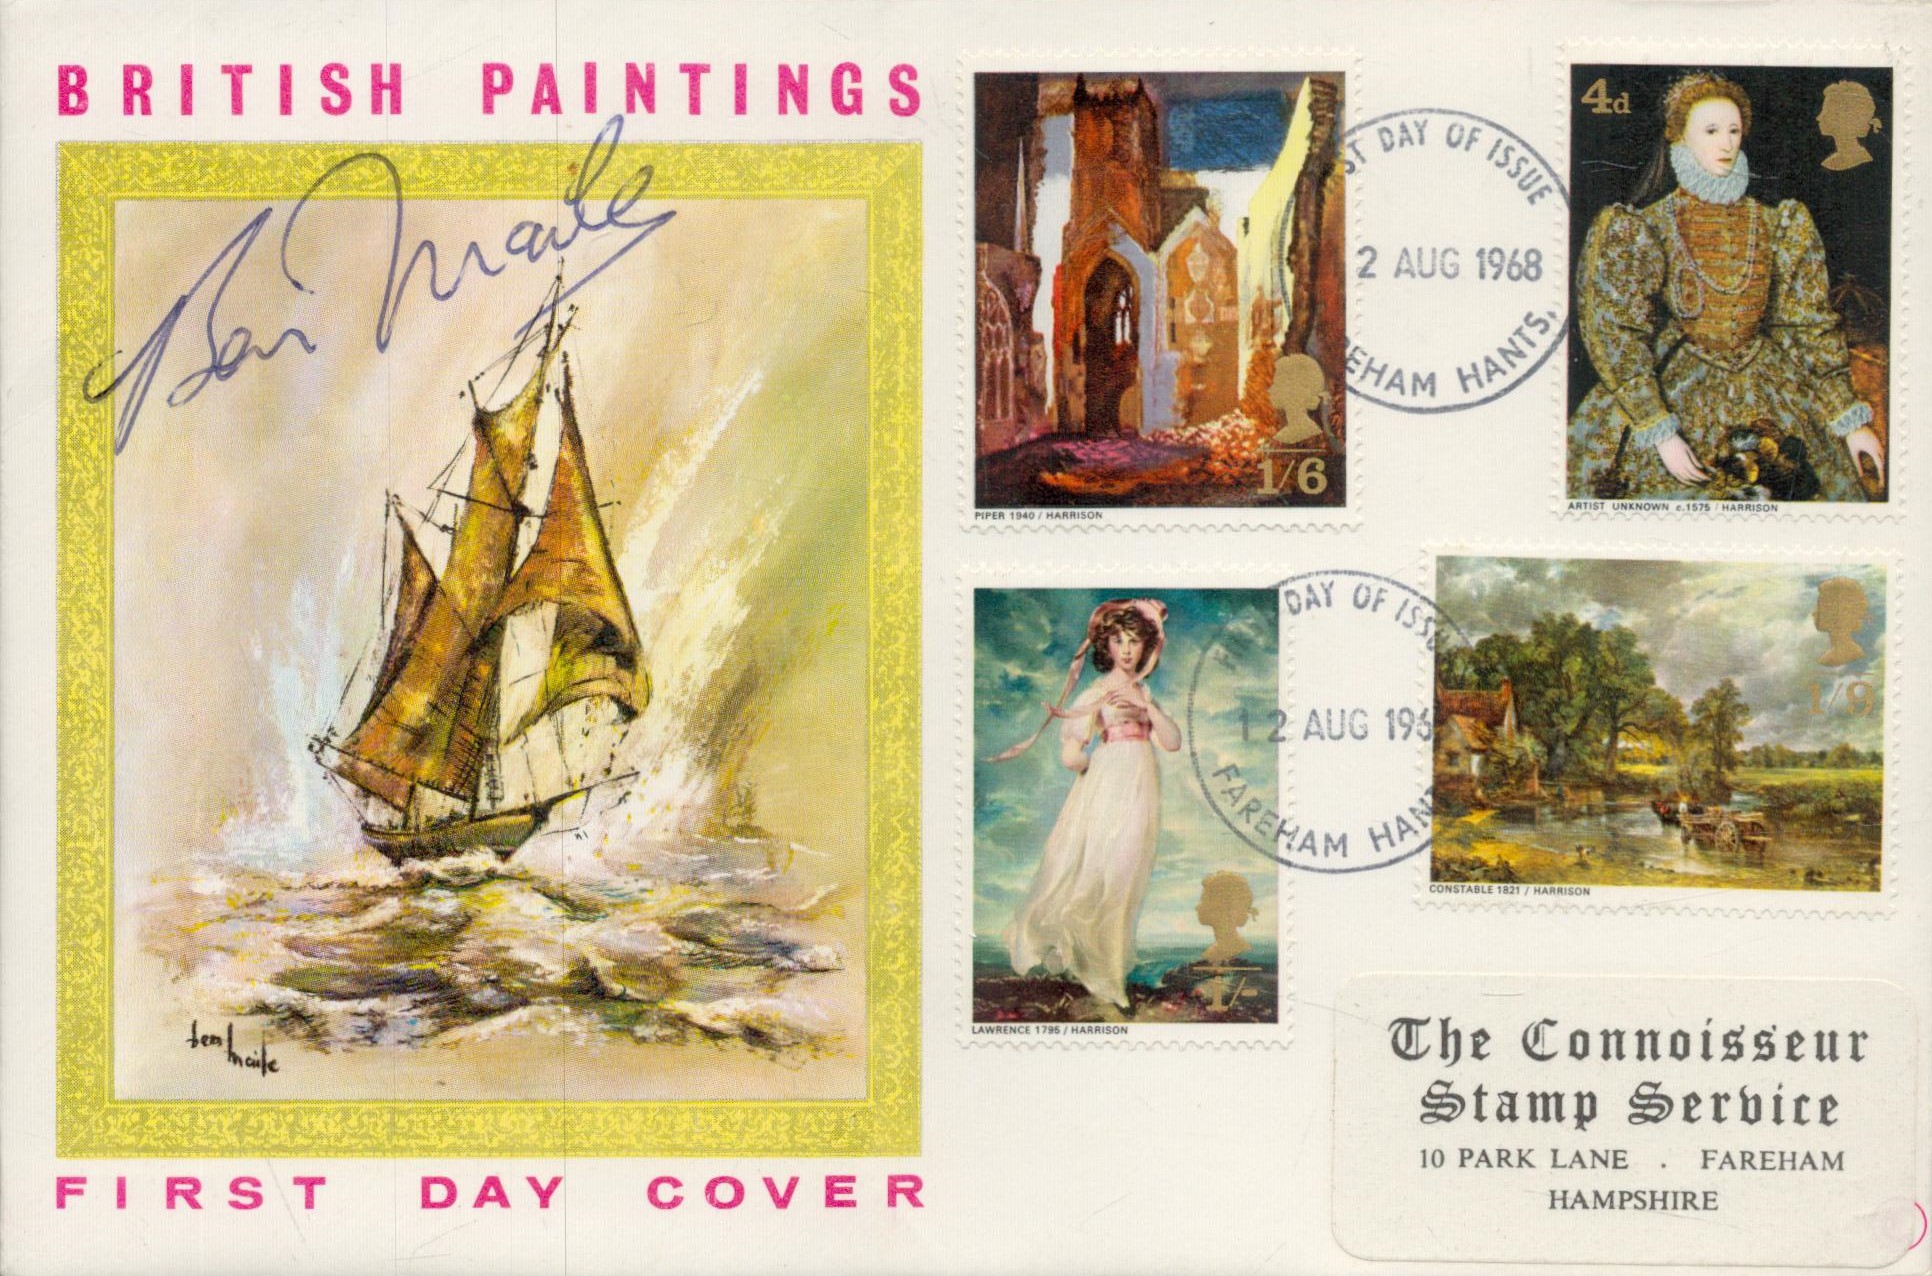 Famous Artist Ben Maile signed 1968 British Paintings FDC, with image of one of his incredible